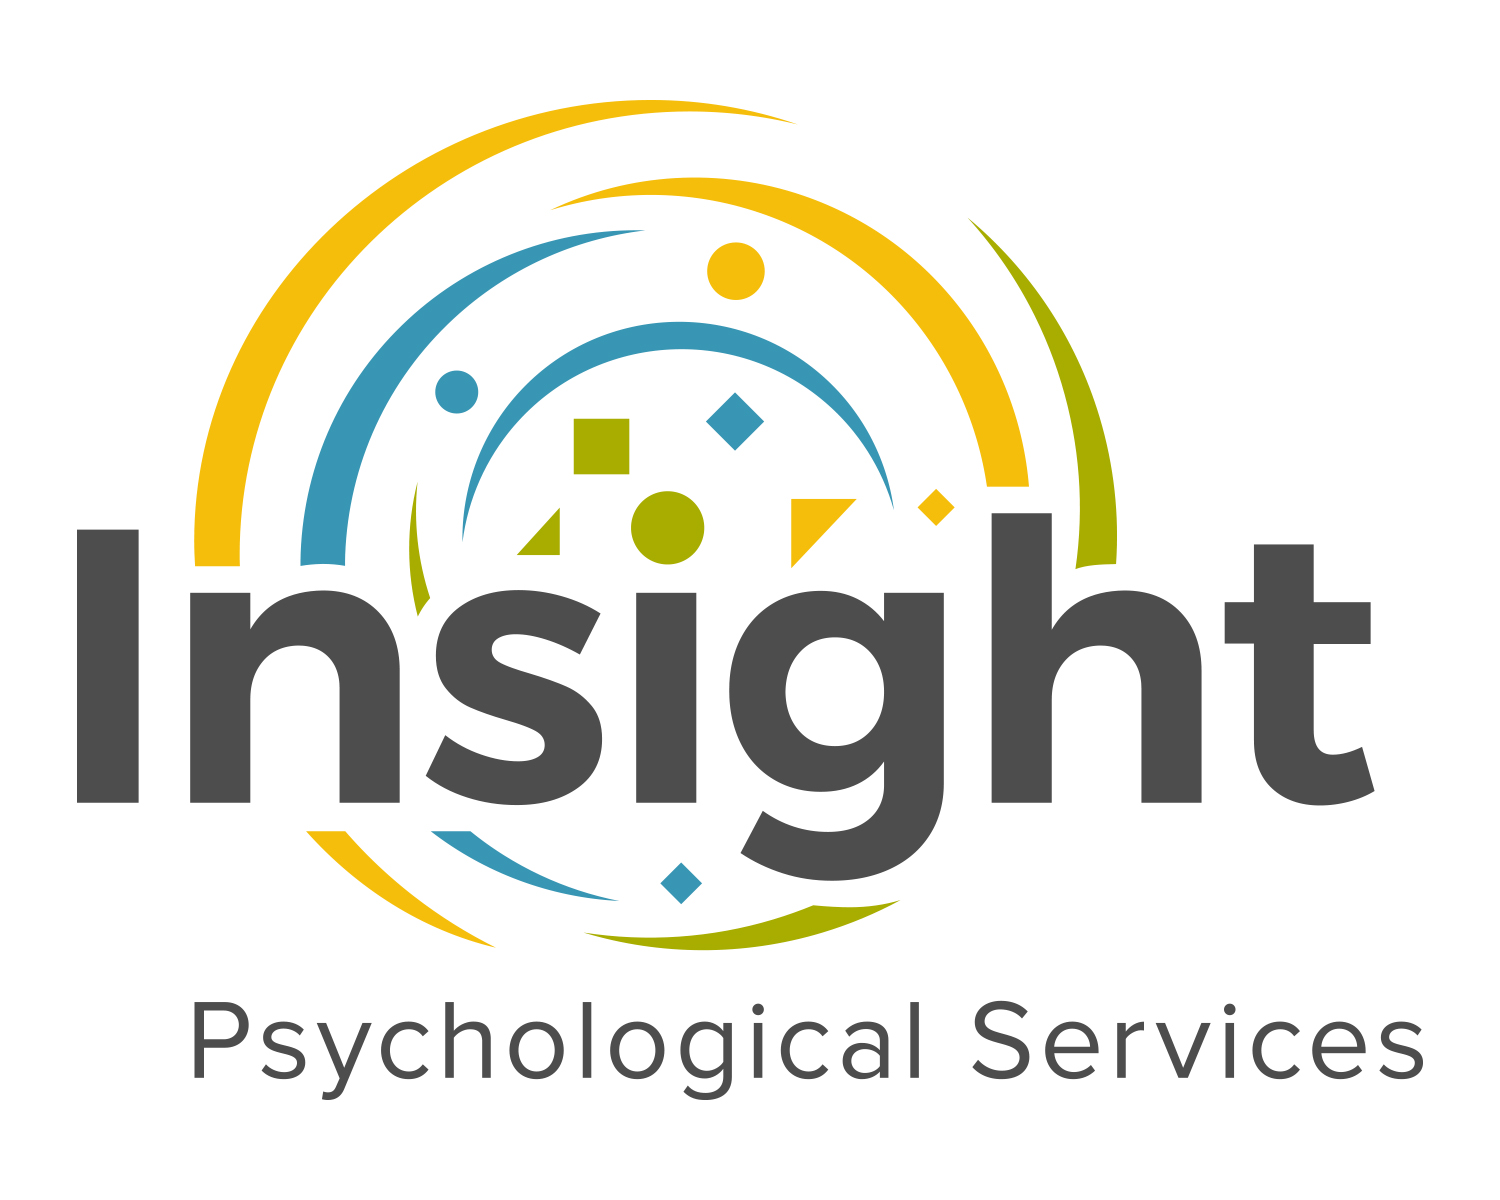 Insight Psychological Services